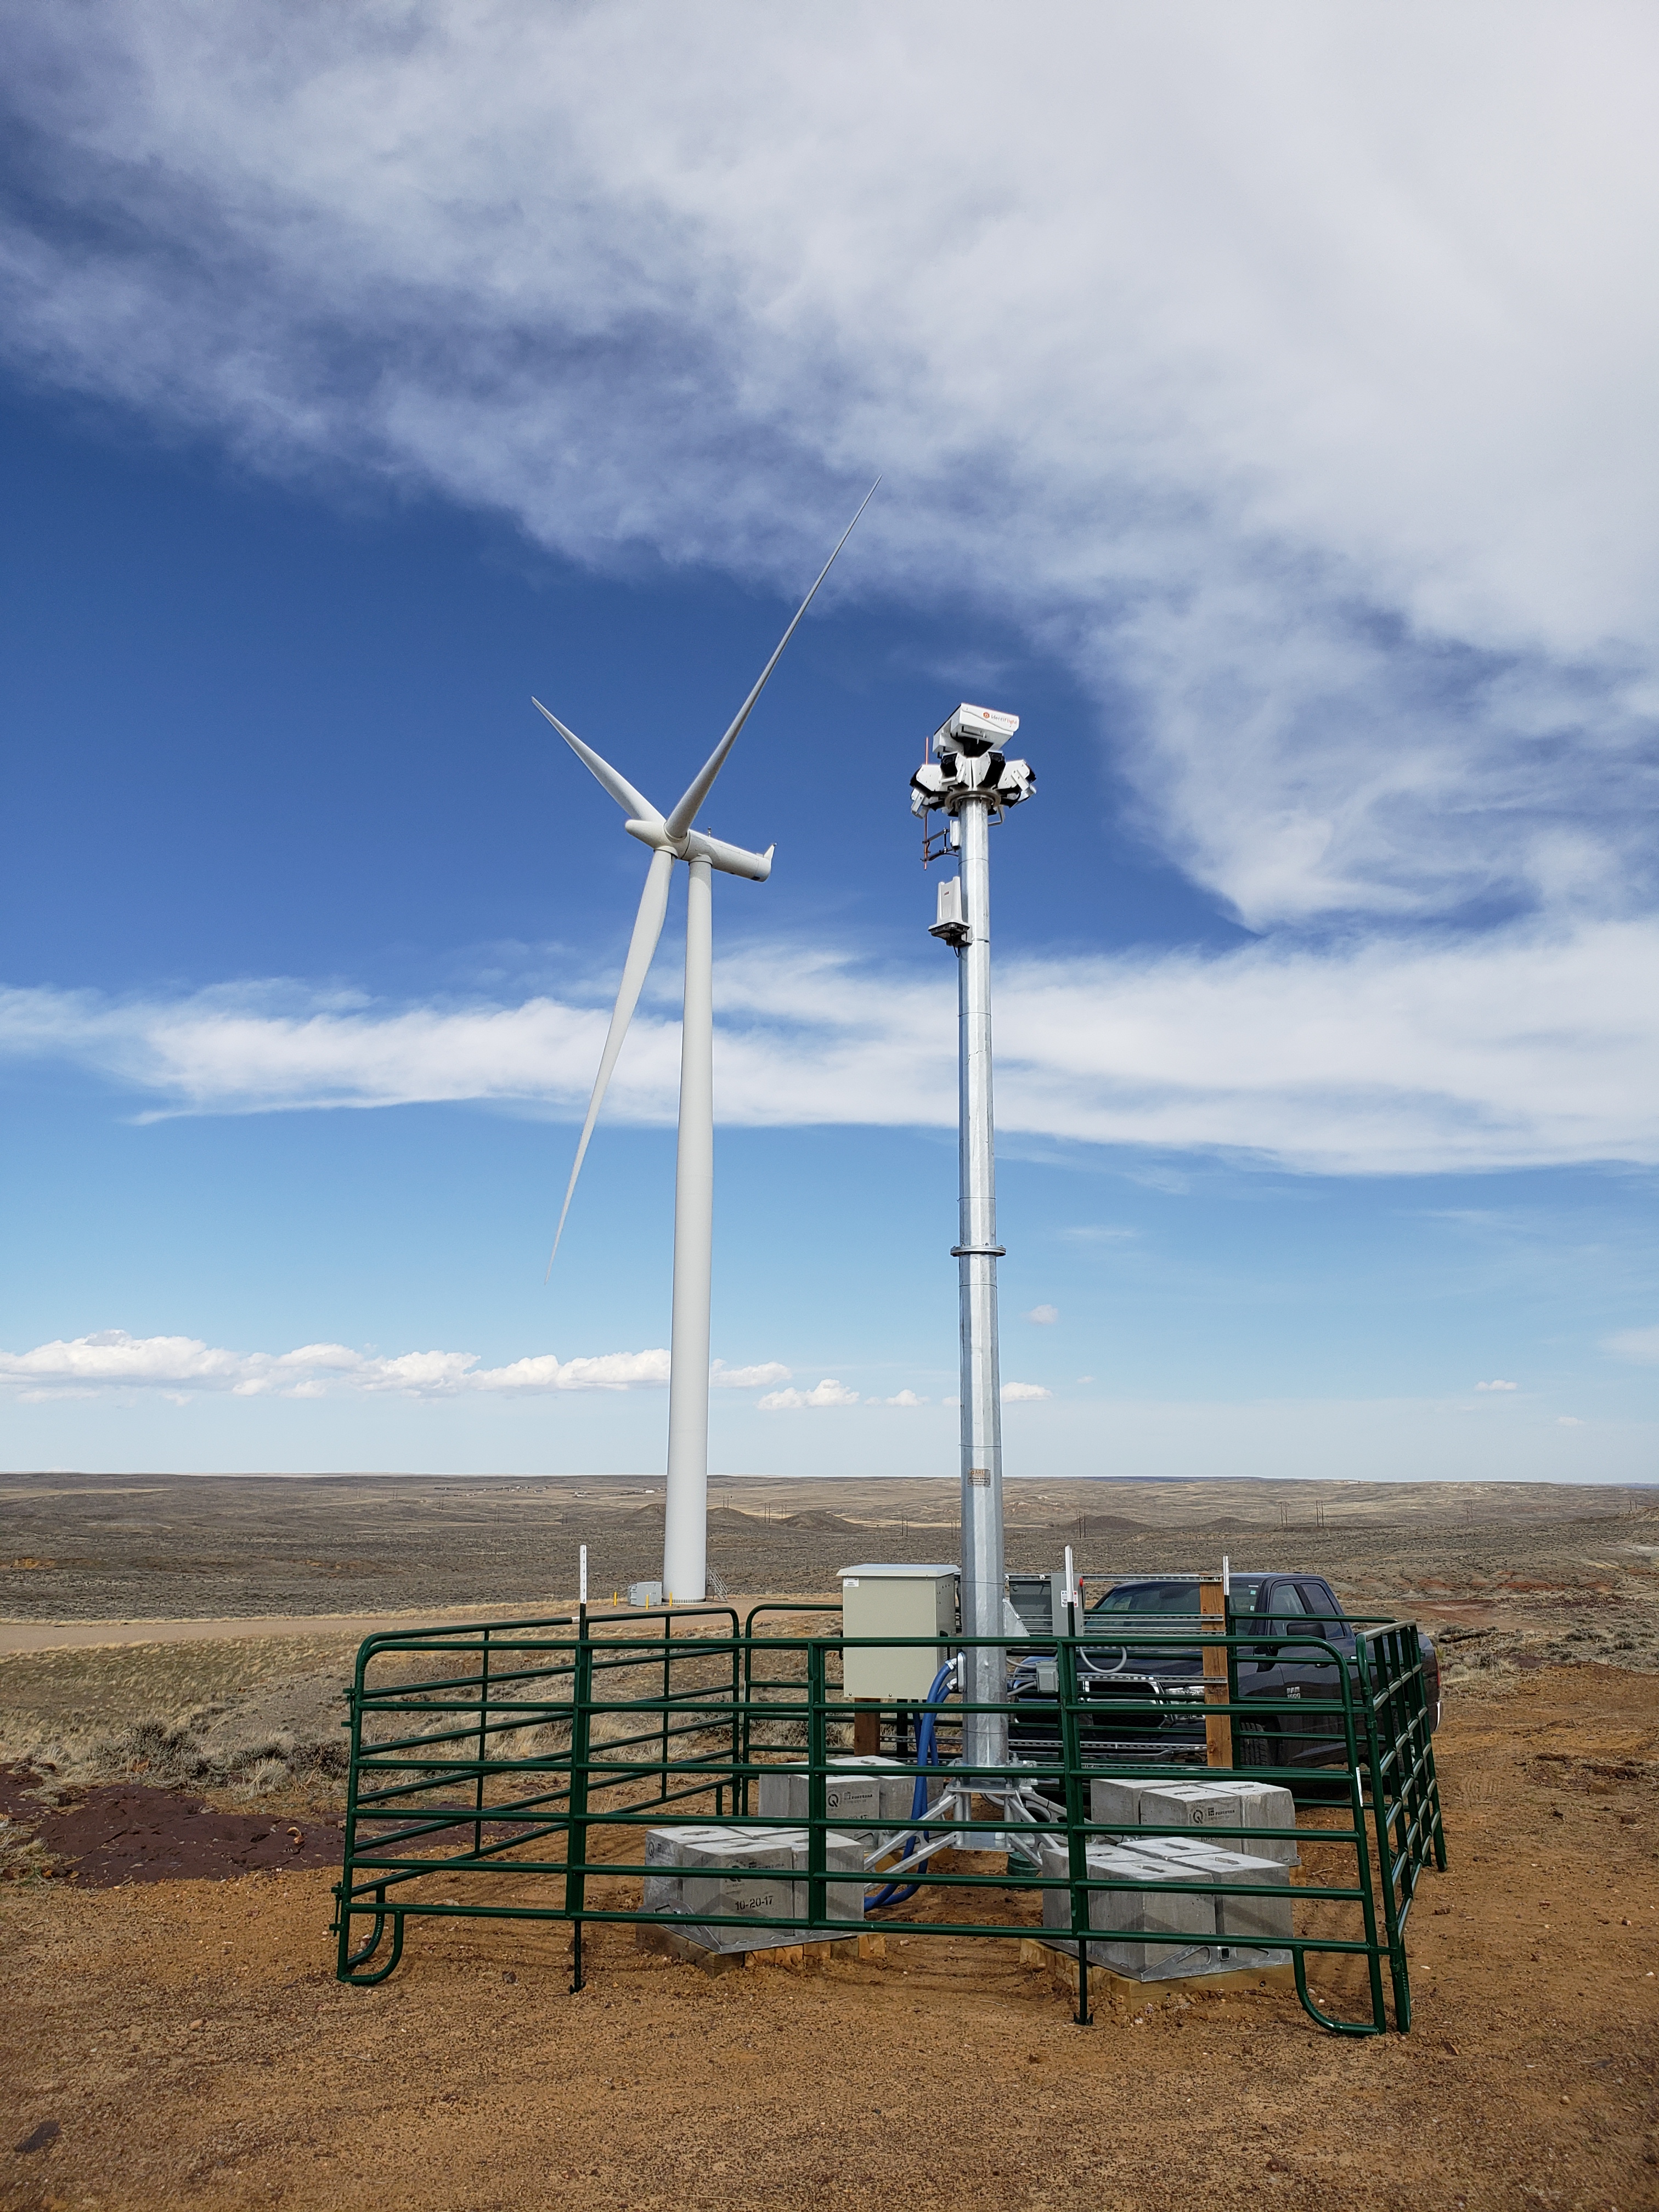 A close up photo of the IdentiFlight automated curtailment system in front of a wind turbine